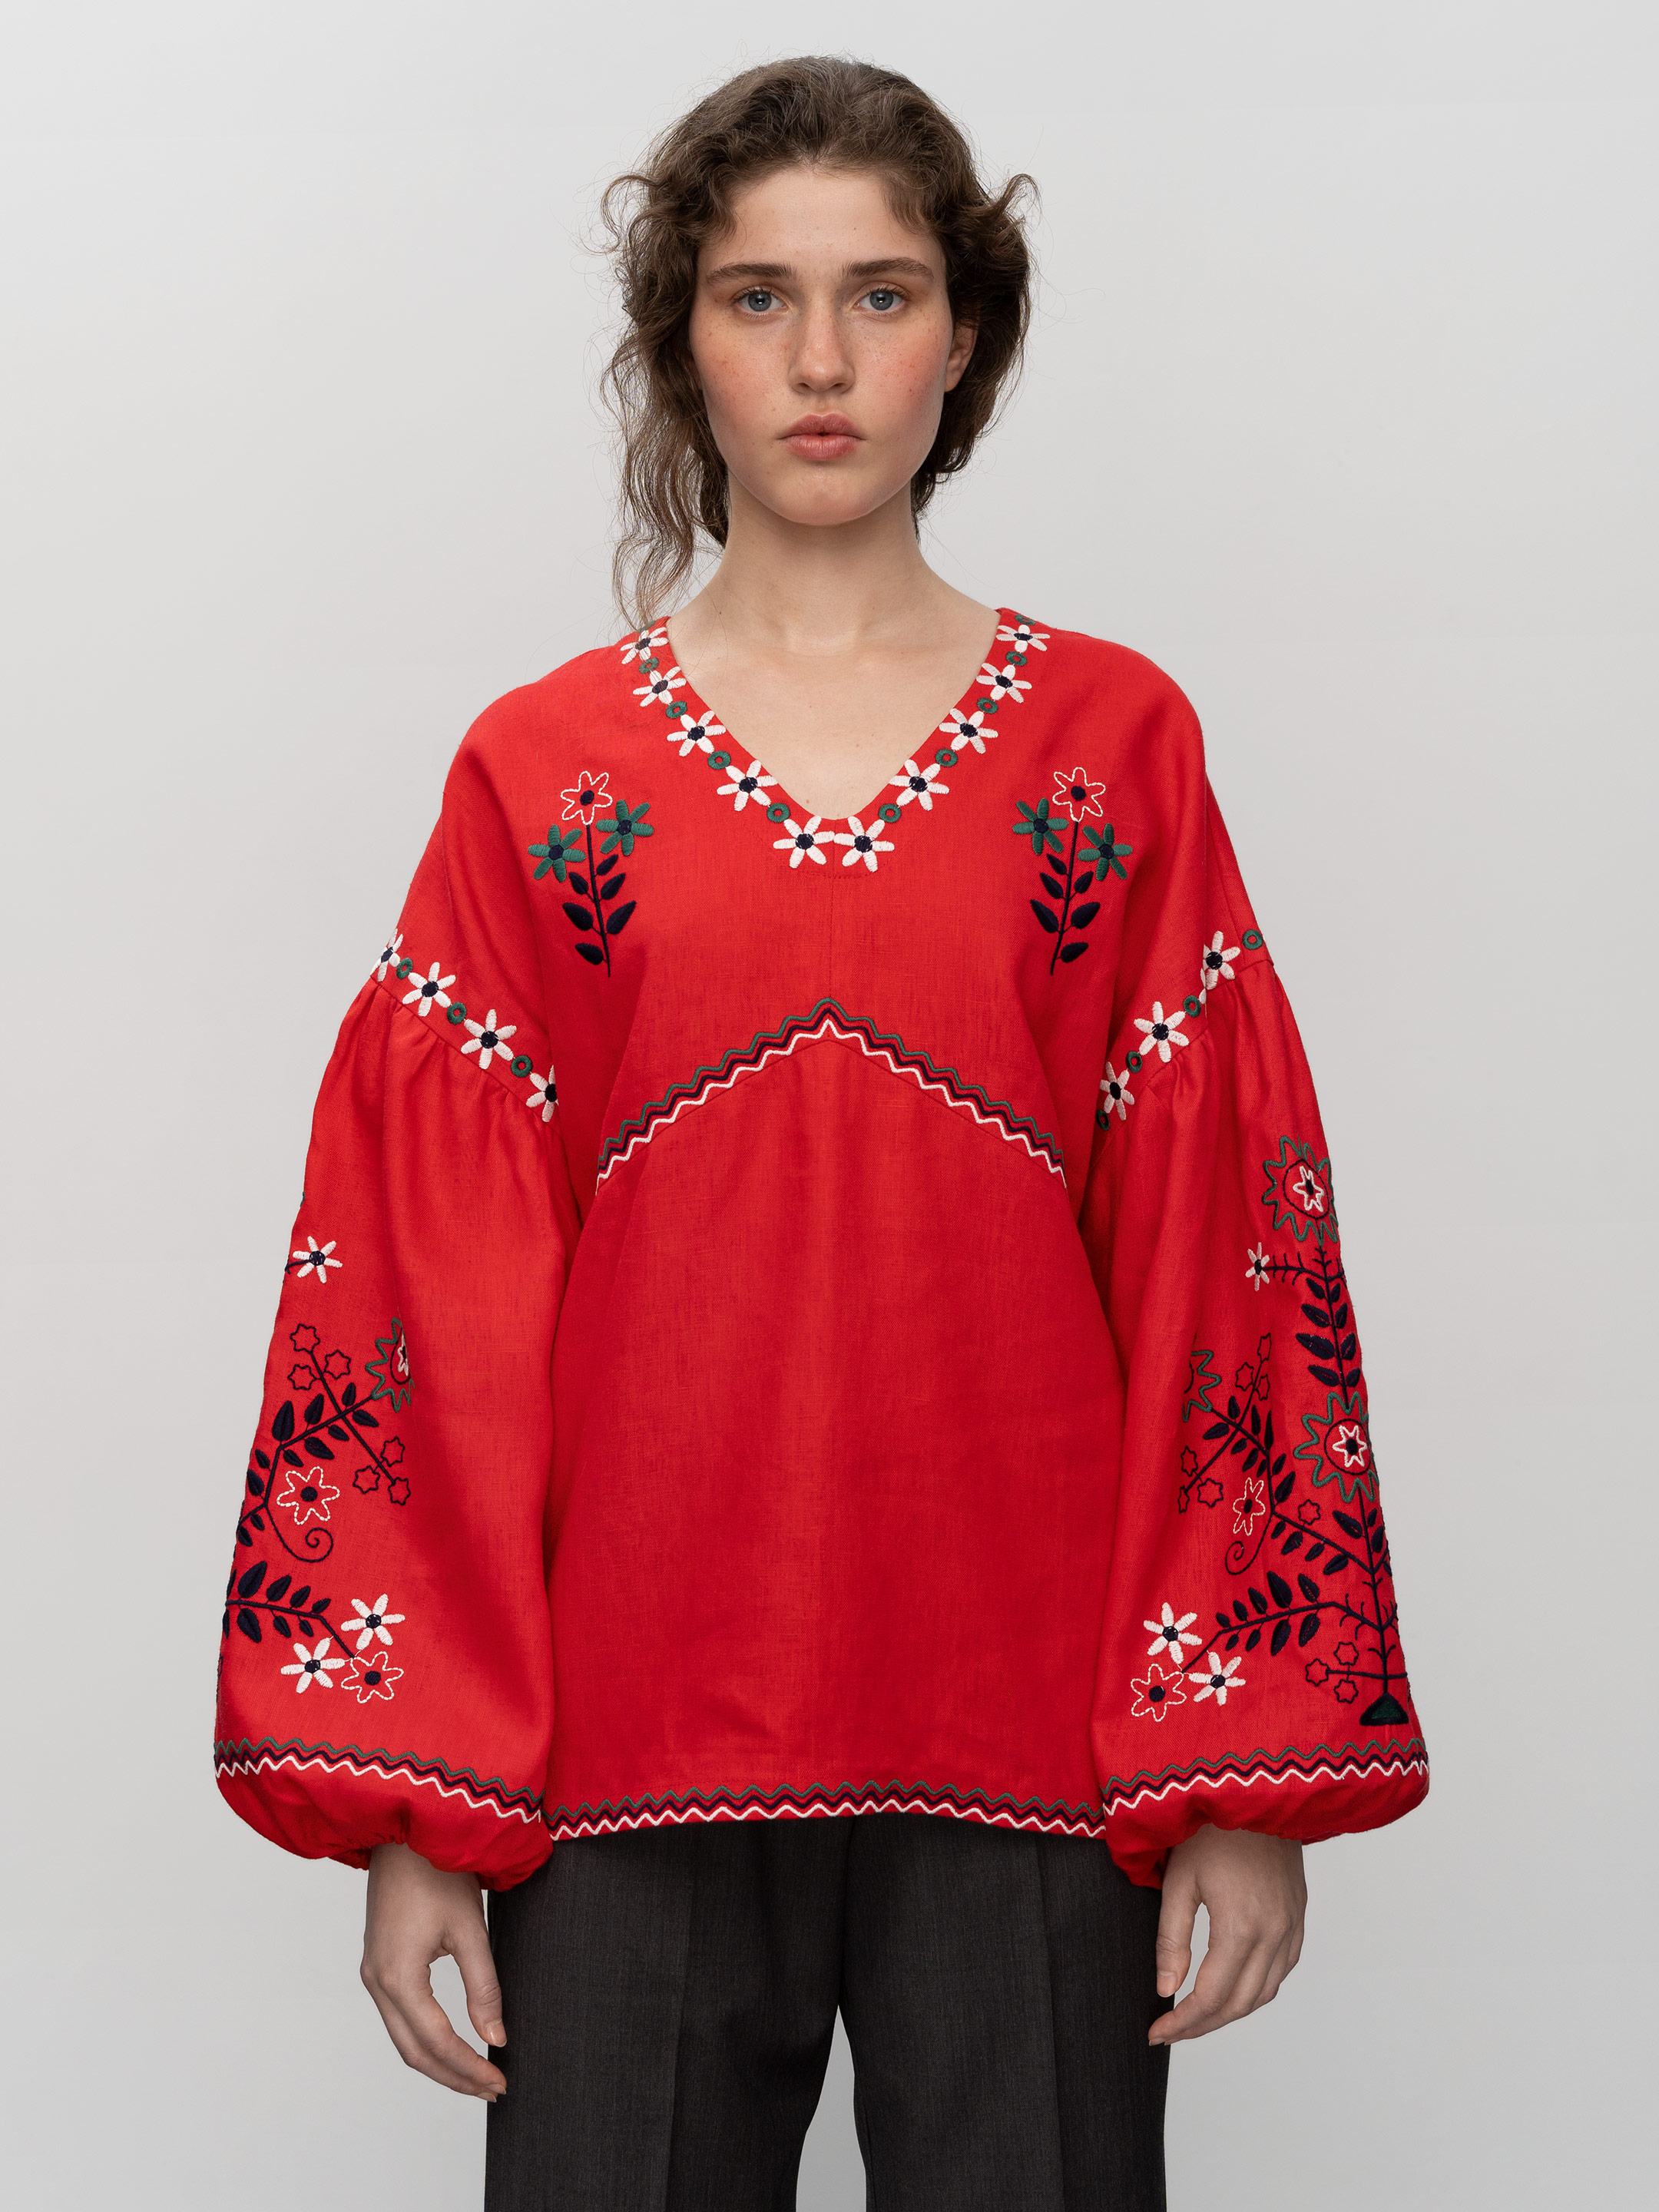 Women's embroidery shirt with floral Obriy Red - photo 1